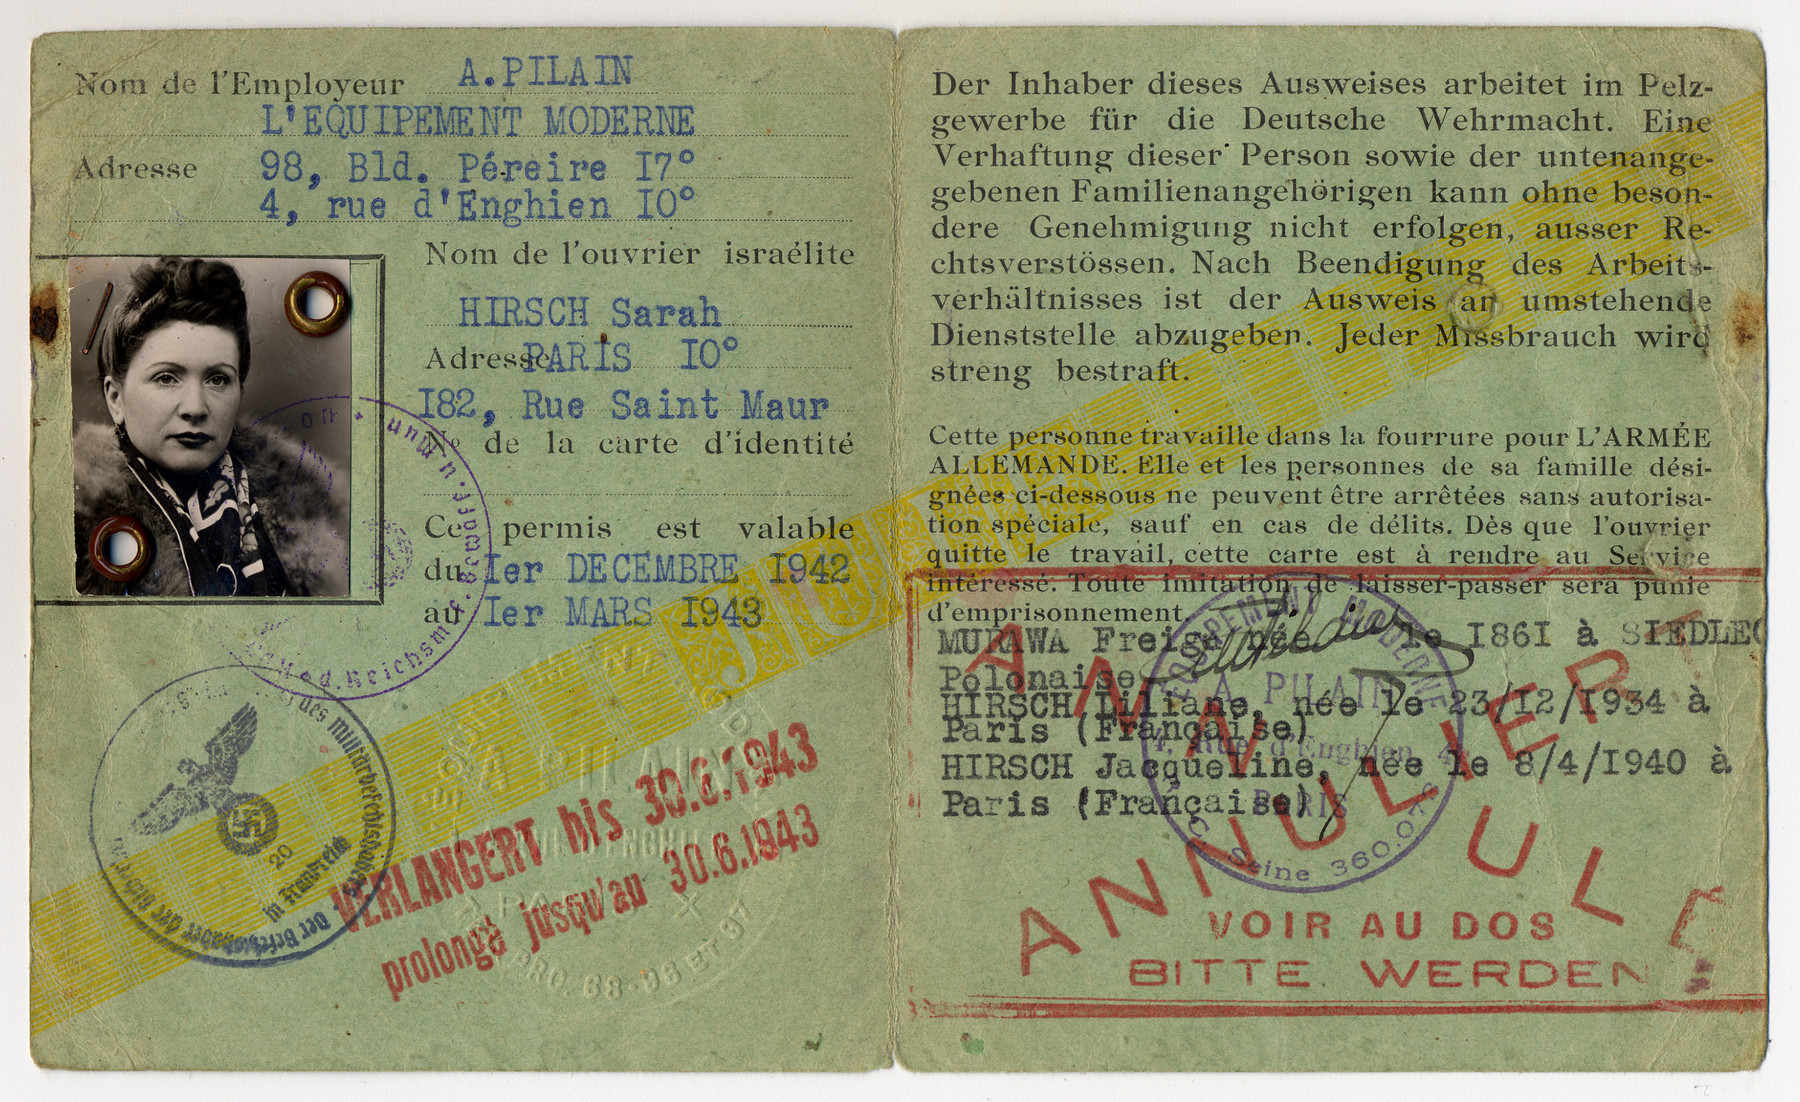 Identification card and laisser-passer paper belonging to Nety Hirsch which allowed her to continue living and working in Paris because it benefited the Nazis.  

The papers, which were initially valid between December 1942 and March 1943, were extended until until March 31, 1944 at which point the Hirsch family went into hiding.  

The text of the Laisser-Passer reads:

"Der inhaber dieses Ausweises arbeited im Pelzgewerbe fuer die Deutsche Wehrmacht.  Eine Verhaftung dieser Person sowie der untenangegebenen Familienangehoerigen kann ohne besondere Genehmigung nicht erfolgen, ausser Rechstverstoessen.  Nach Beendigung des Arbeitsverhaeltnisses ist der Ausweis an umstehende Dienststelle abzugeben.  Jeder Missbrauch wird steng bestraft."

Translated:

"The owner of this identification card works in the fur industry for the German army.  An arrest of this person or the below-specified family members cannot proceed without special approval, outside of a right violation.   After the end of the working relationship, the identification must be handed over to the surrounding agency.  Each abuse will be harshly punished."